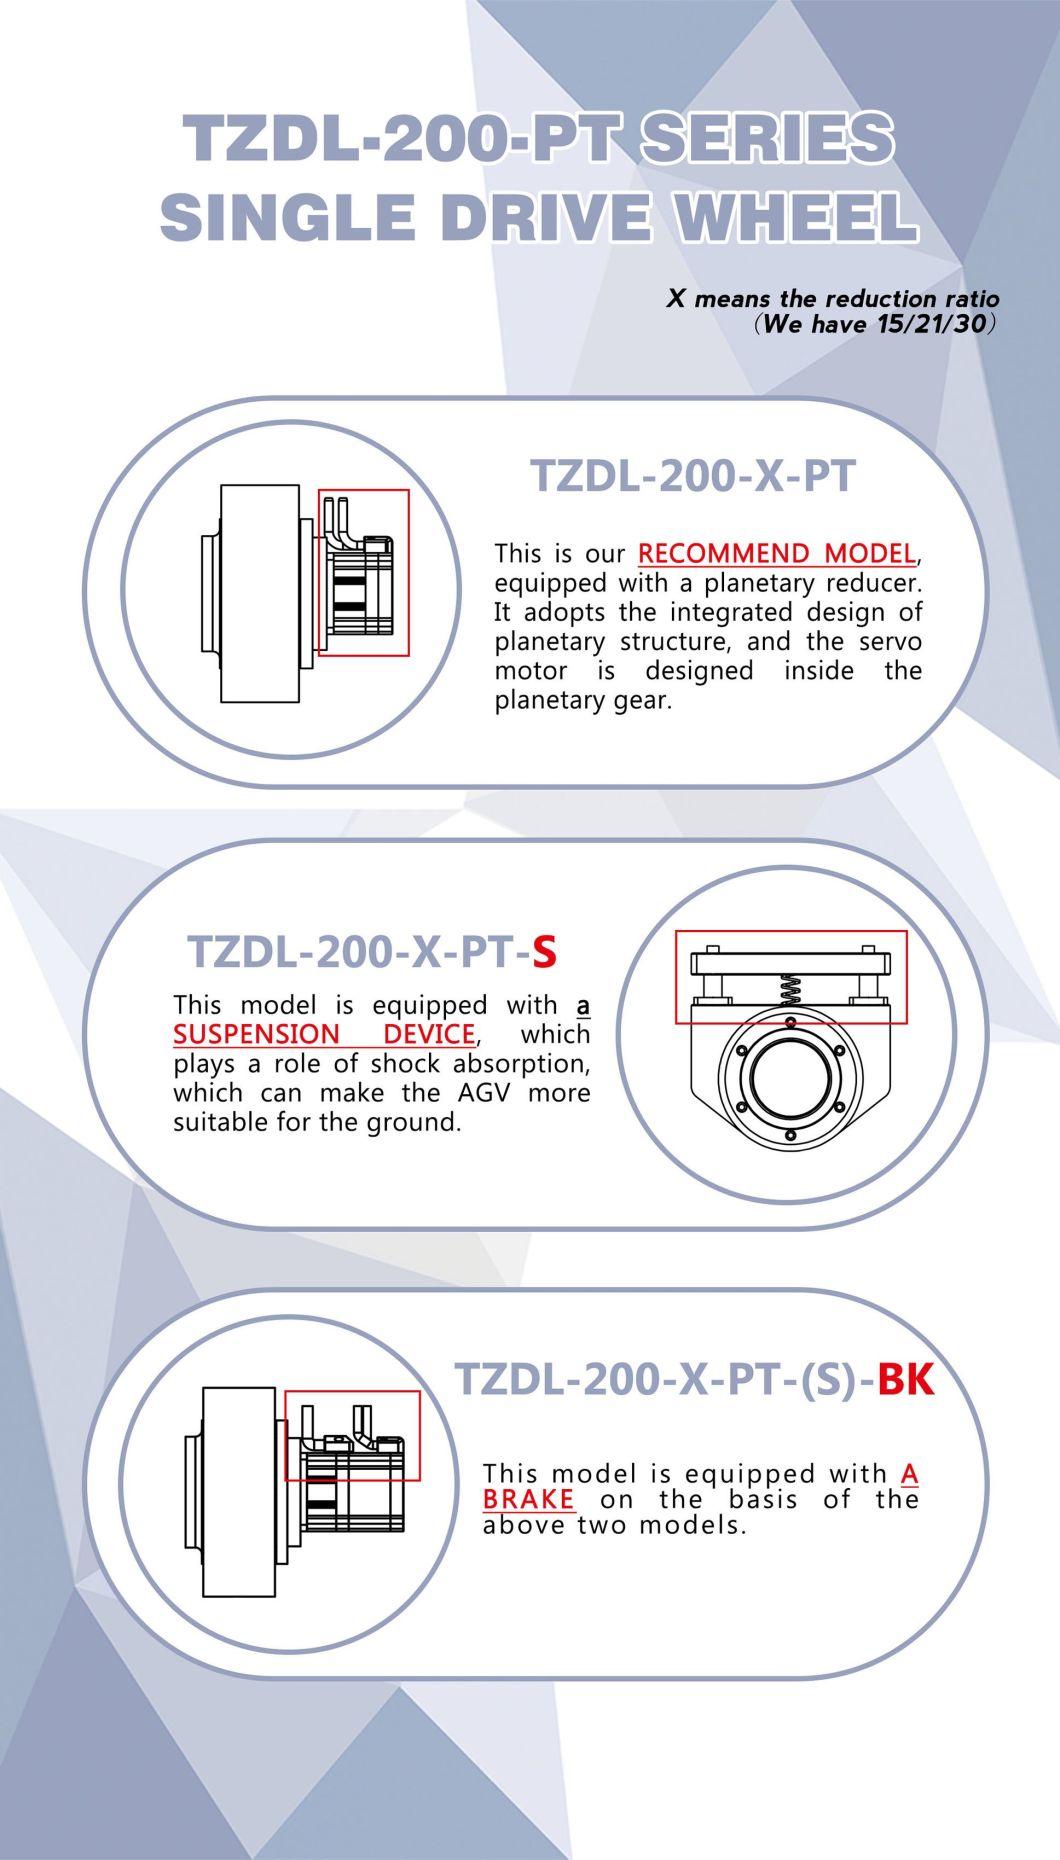 Latest Wheel Type Tzdl-200-PT Series Agv Wheel with 200kg Load Capacity with Shock-Absorbing Suspension Device for Industrial Agv Vehicle Robot (TZDL-200-PT-S)